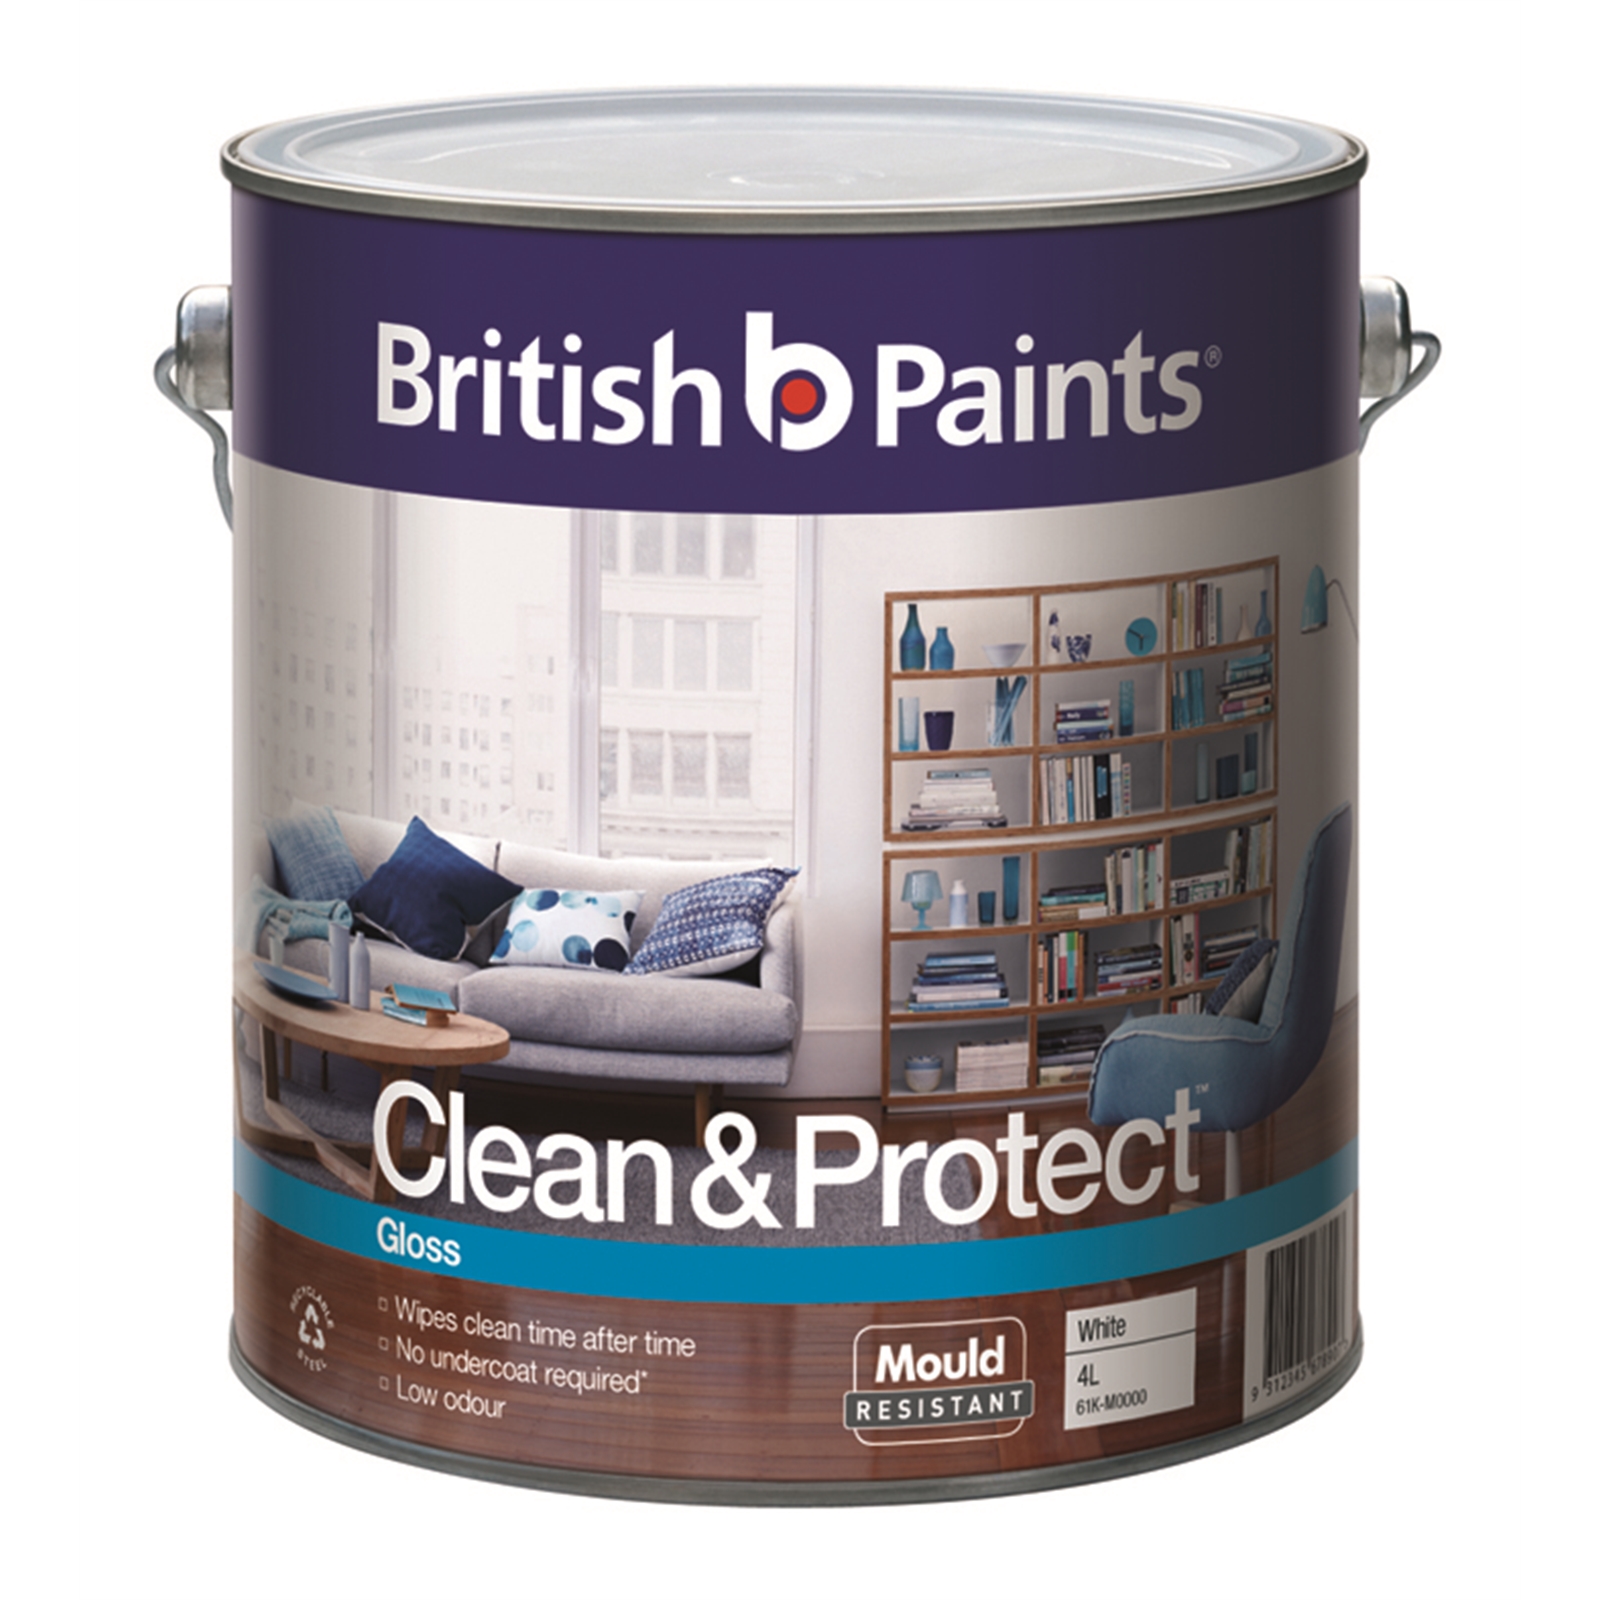 British Paints Clean & Protect 4L Gloss White Interior Paint